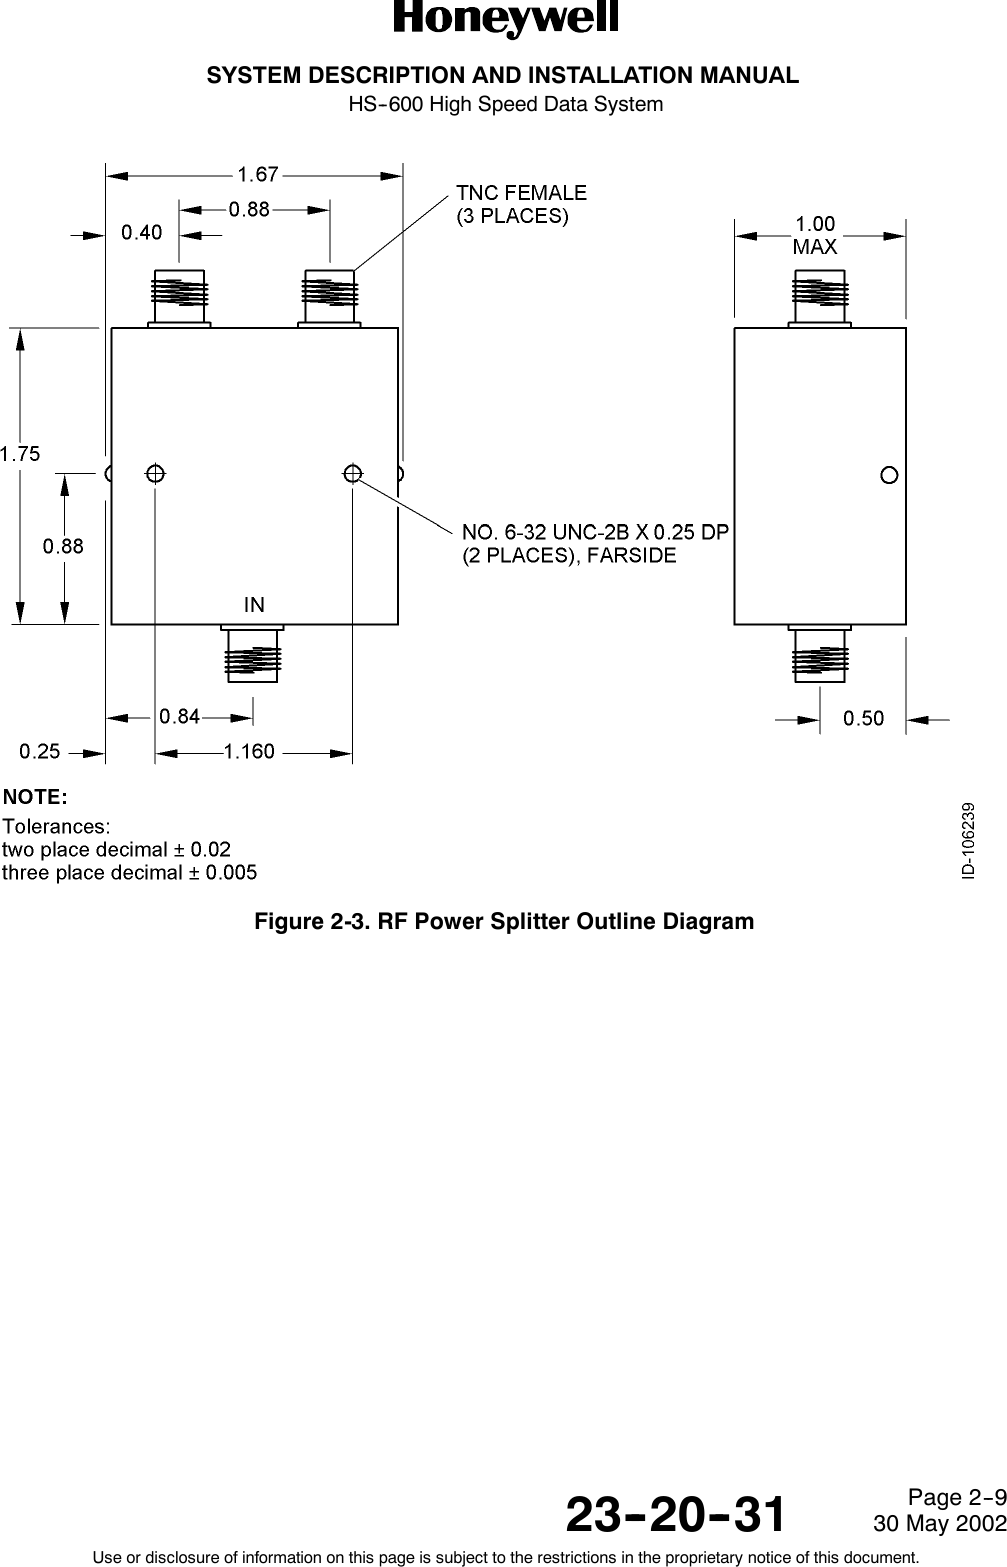 SYSTEM DESCRIPTION AND INSTALLATION MANUALHS--600 High Speed Data System23--20--3130 May 2002Use or disclosure of information on this page is subject to the restrictions in the proprietary notice of this document.Page 2--9Figure 2-3. RF Power Splitter Outline Diagram